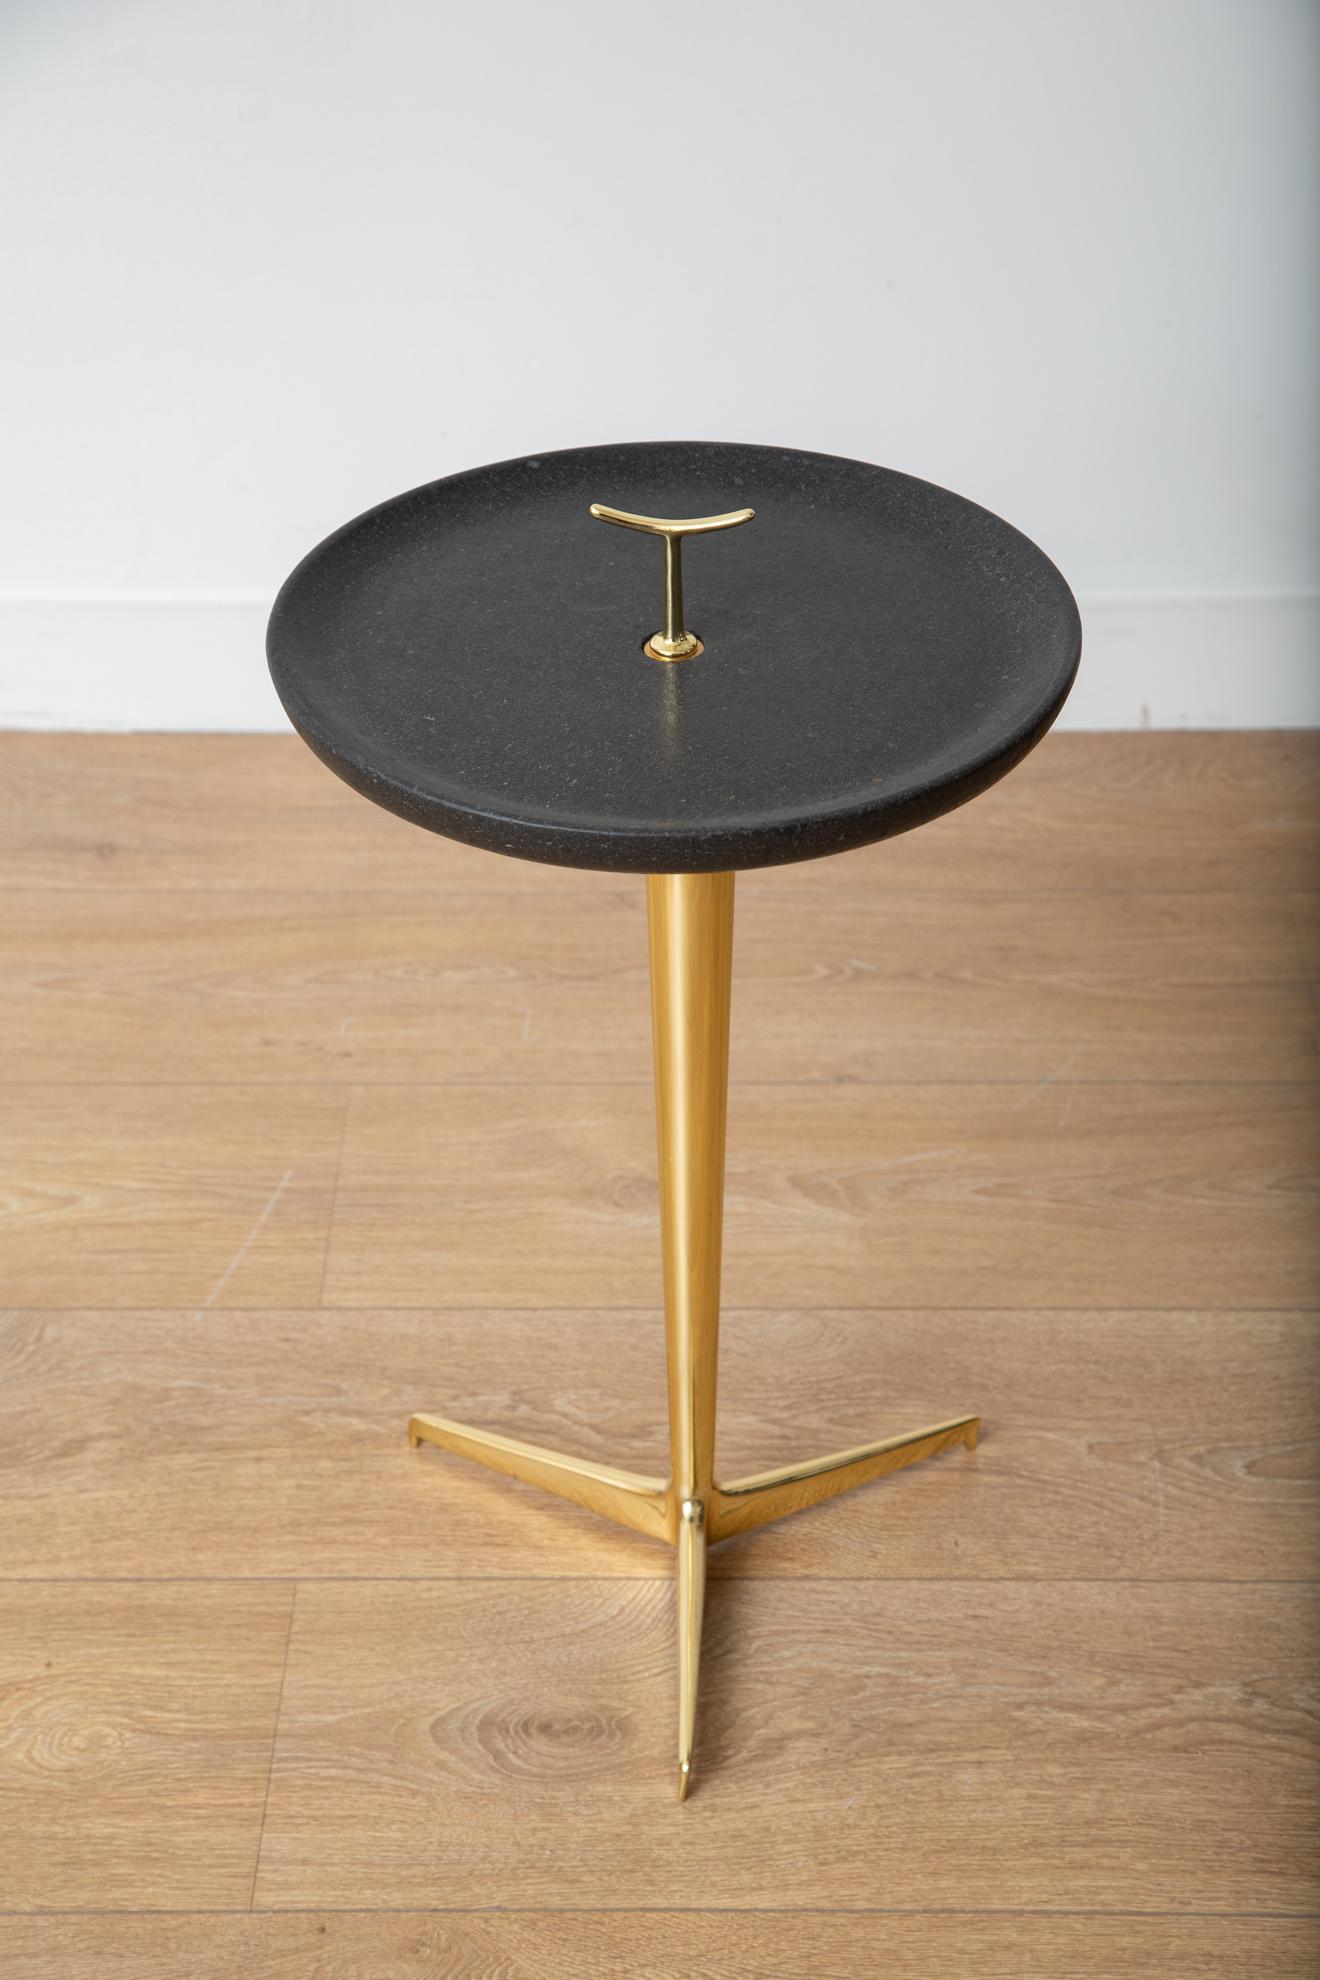 Contemporary brass and lava stone top drinks or side table
Polished brass structure with 3-pronged foot 
Beveled lava stone top with stylized finial 
Available to view in-situ in our Miami gallery.

 